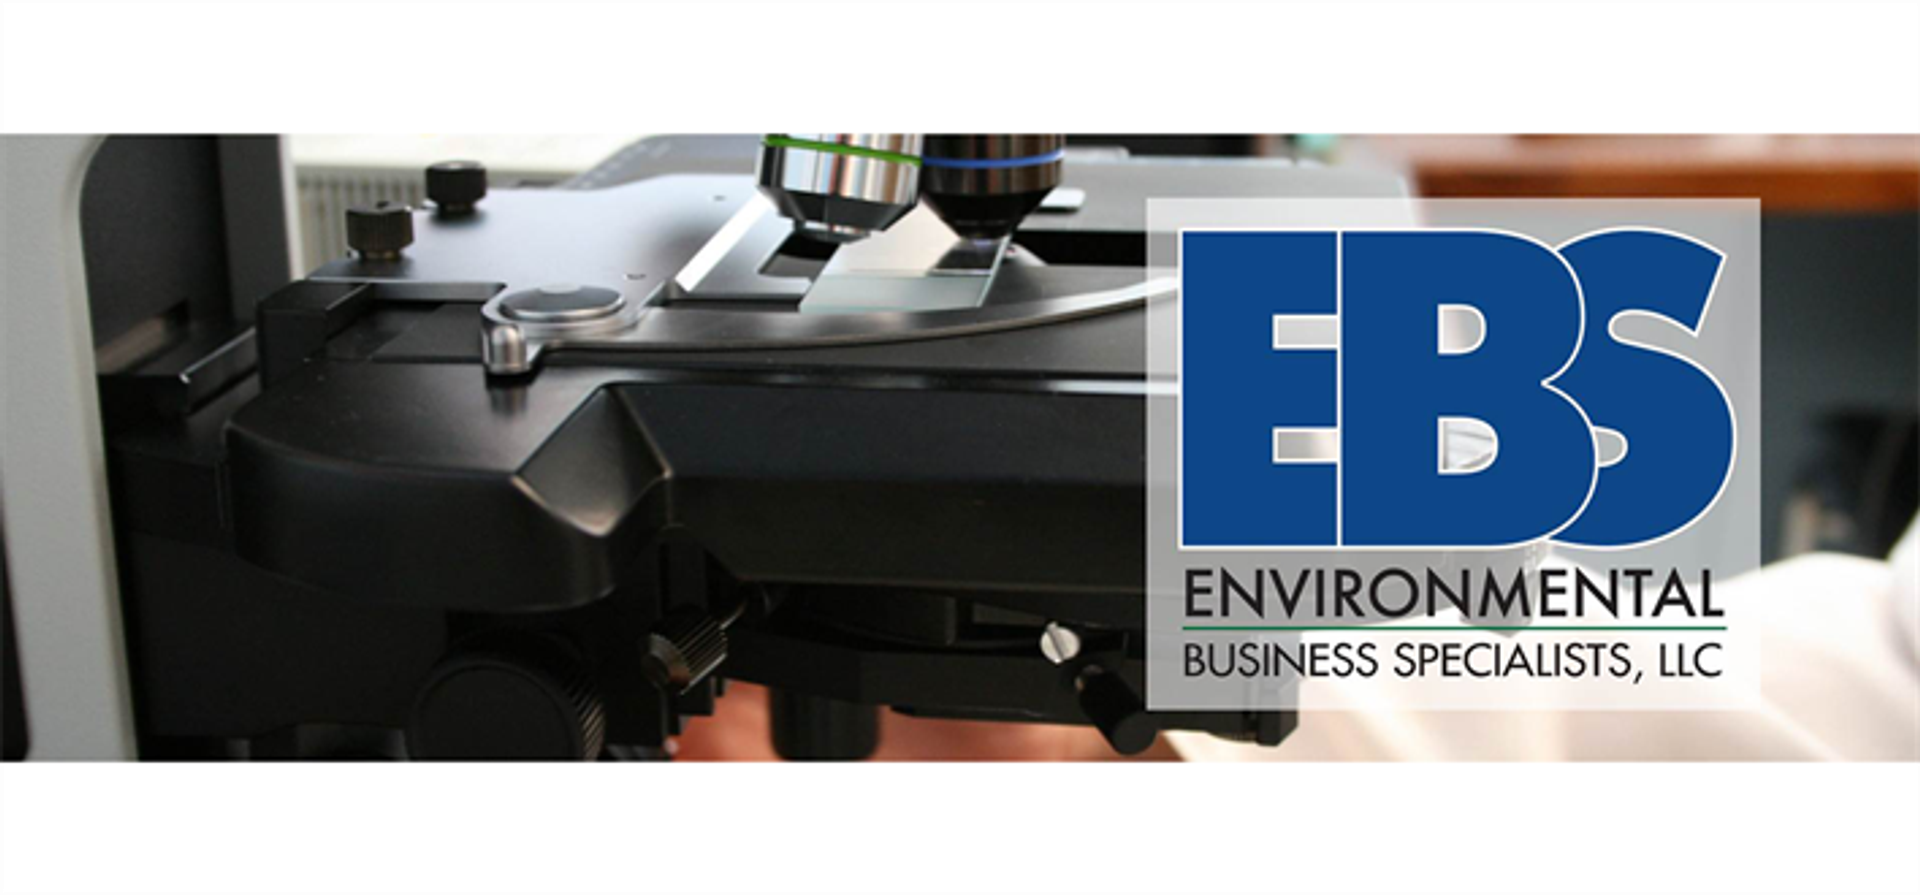 Environmental Business Specialists, LLC